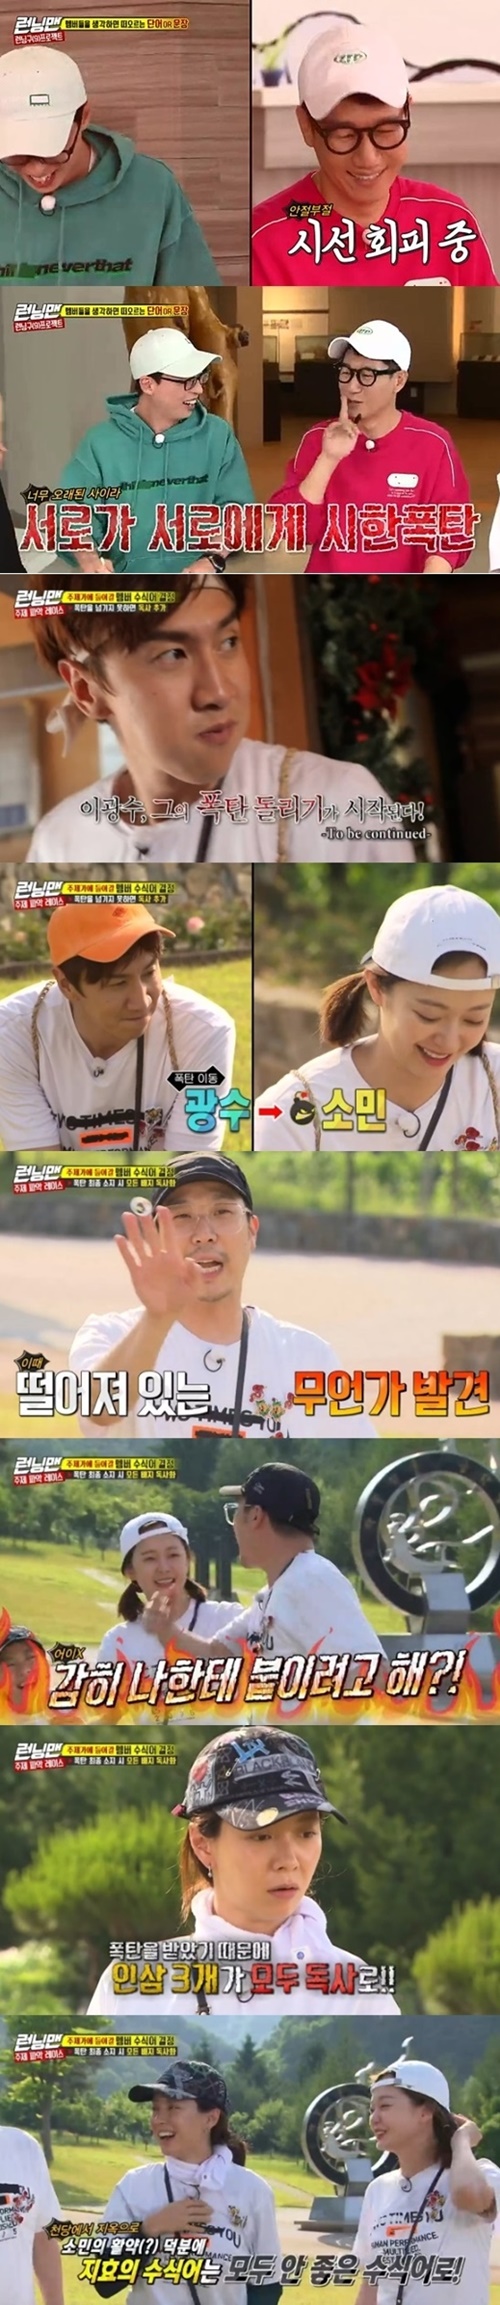 Running Man actor Jeon So-min kept the top spot in the same time zone of the 2049 Target Viewpoint, while giving Song Ji-hyo a bomb and causing laughter.According to Nielsen Korea, a ratings agency on the 17th, Running Man, which was broadcast on the afternoon of the 16th, soared to 8.4% of the highest audience rating per minute, and the 2049 target audience rating, an important indicator of major advertising officials, recorded 3.8% (based on the second part of the audience rating of households in the Seoul Capital Area), ranking first in the same time zone, surpassing Masked Wang and Donkey Ears.The average audience rating was 5.2% in the first part and 6.8% in the second part (based on the audience rating of households in the Seoul Capital Area).The broadcast was decorated with a theme-reading race for the theme song to be presented at the Fan Meeting this summer.The members had to set the number of good modifiers ( Ginseng badges) and bad modifiers (poison badges) of the theme song while they decided to participate in the songwriting of the theme song themselves, and had to move to the bomb within an hour of the bomb because there was a bomb.Because there is a time limit for bombs, if you pass that time, you will get a viper badge. Even if you take it, you will get another viper badge.Among them, Jeon So-min showed off the like a poison that led to the reversal, shook the plate of the race, and noticed that he had a bomb late on the last mission.The scene soared to 8.4% of the audience rating per minute, accounting for the best one minute.So, Jeon So-min showed boldness of handing over his bomb to Song Ji-ryu, and Song Ji-hyo, who ran Race 1st pRace, had to watch his ginseng badge turned into a poison badge at the last minute.Yoo Jae-Suk took the first pRace in the race as a fisherman, and Yoo Jae-Suk chose a modifier to enter the theme song based on the badge of each member.The Running Man Theme Song, which participated in the members lyrics, will be unveiled at the Running Man Fan Meeting to be held this summer.